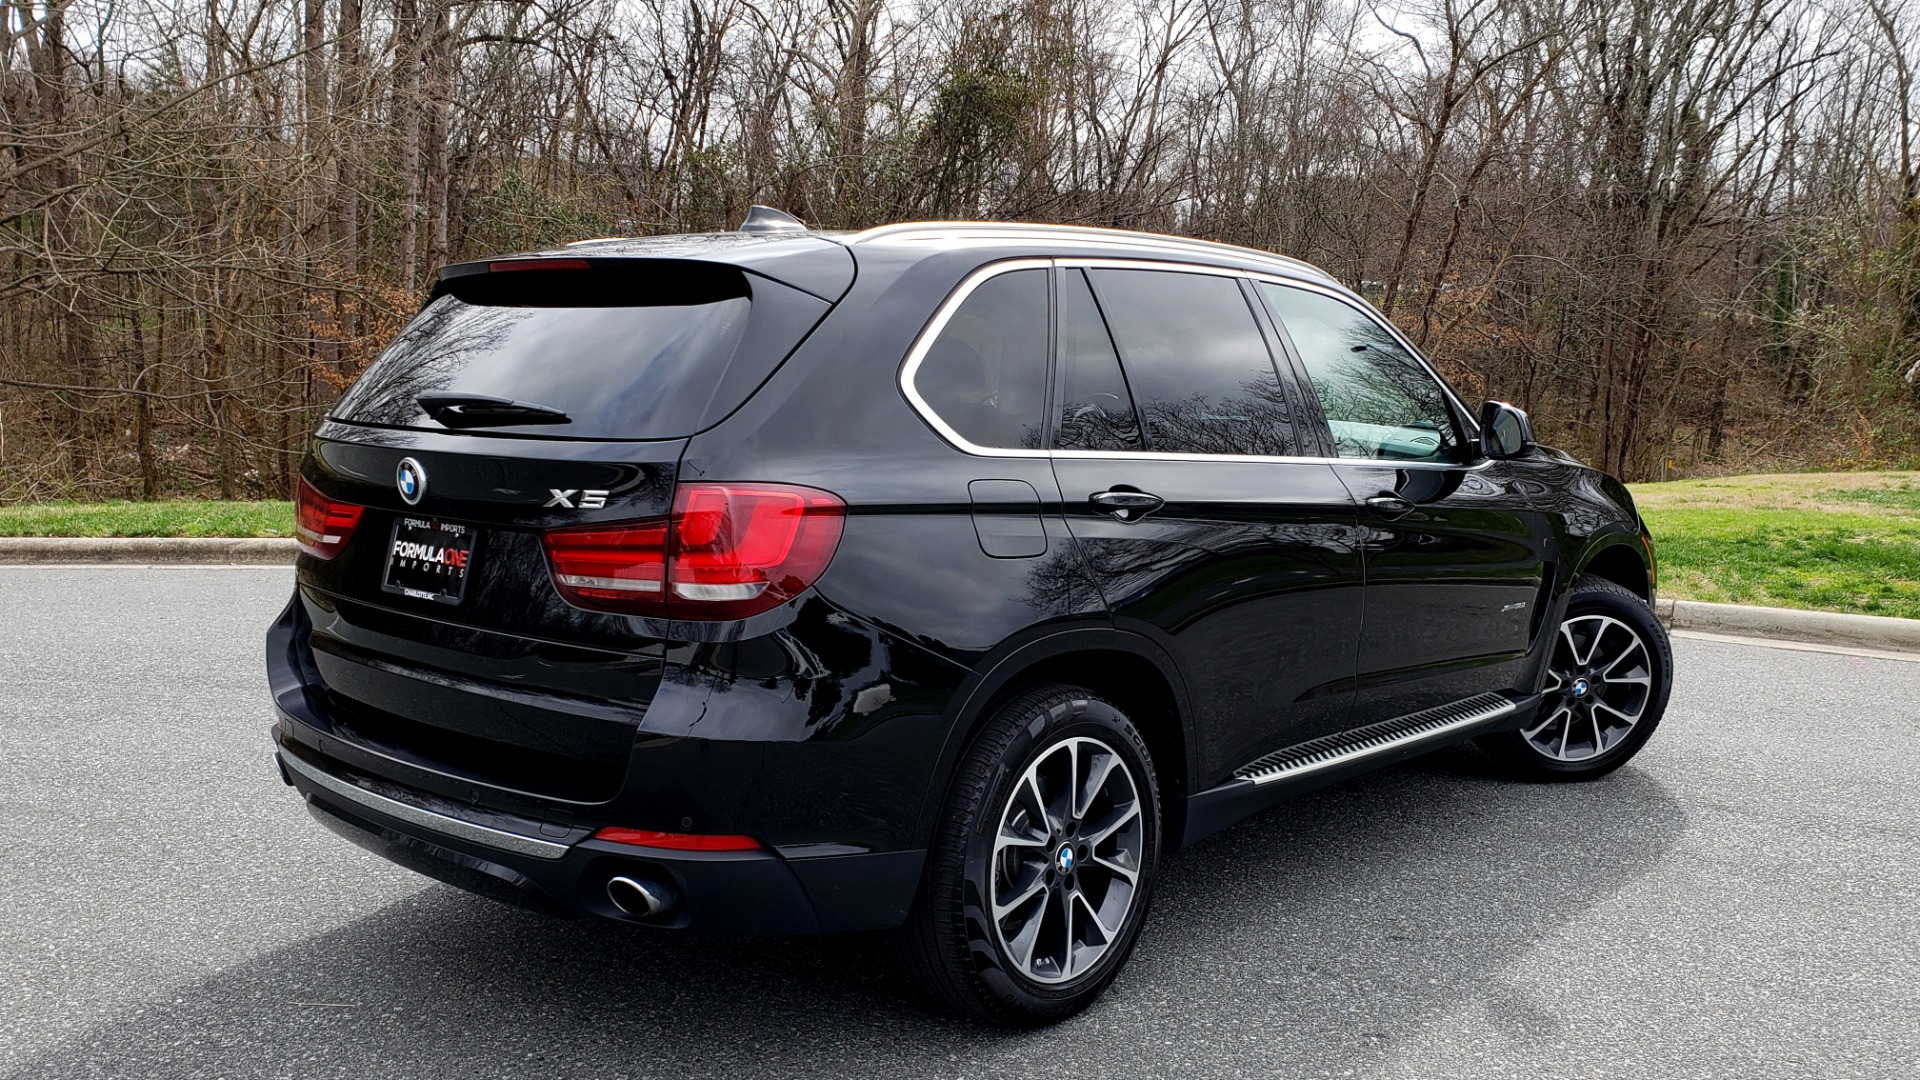 Used 2017 BMW X5 XDRIVE35I / PREM LUX PKG / DRVR ASST / CLD WTHR / APPLE CAR PLAY for sale Sold at Formula Imports in Charlotte NC 28227 6